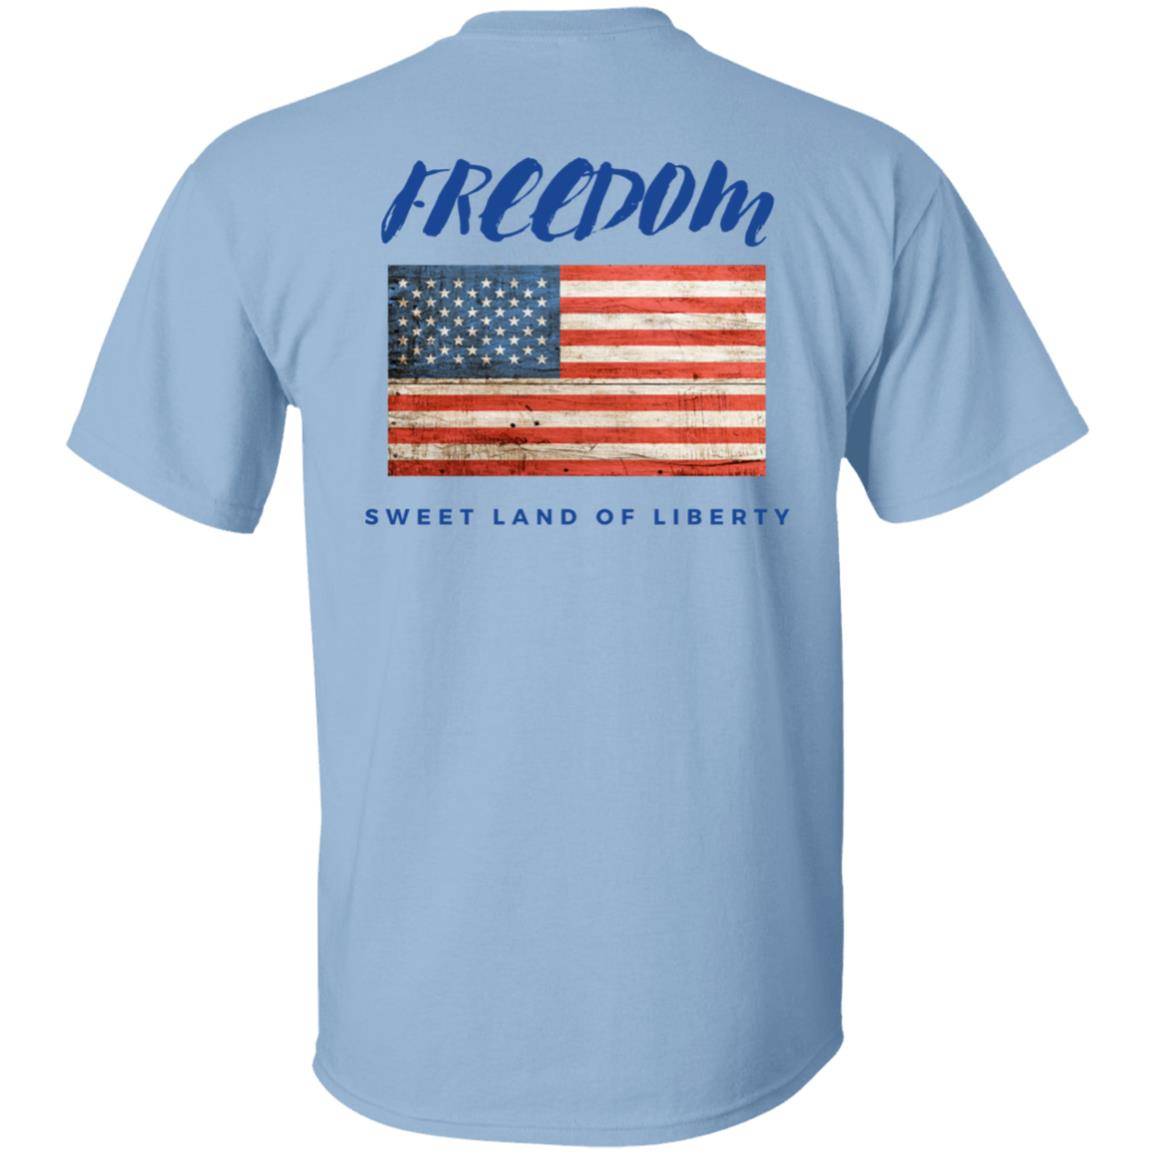 Light blue, heavyweight classic unisex t-shirt in 100% cotton. Freedom is written across the chest back with a grunge American flag below it and written beneath that is Sweet Land of Liberty.